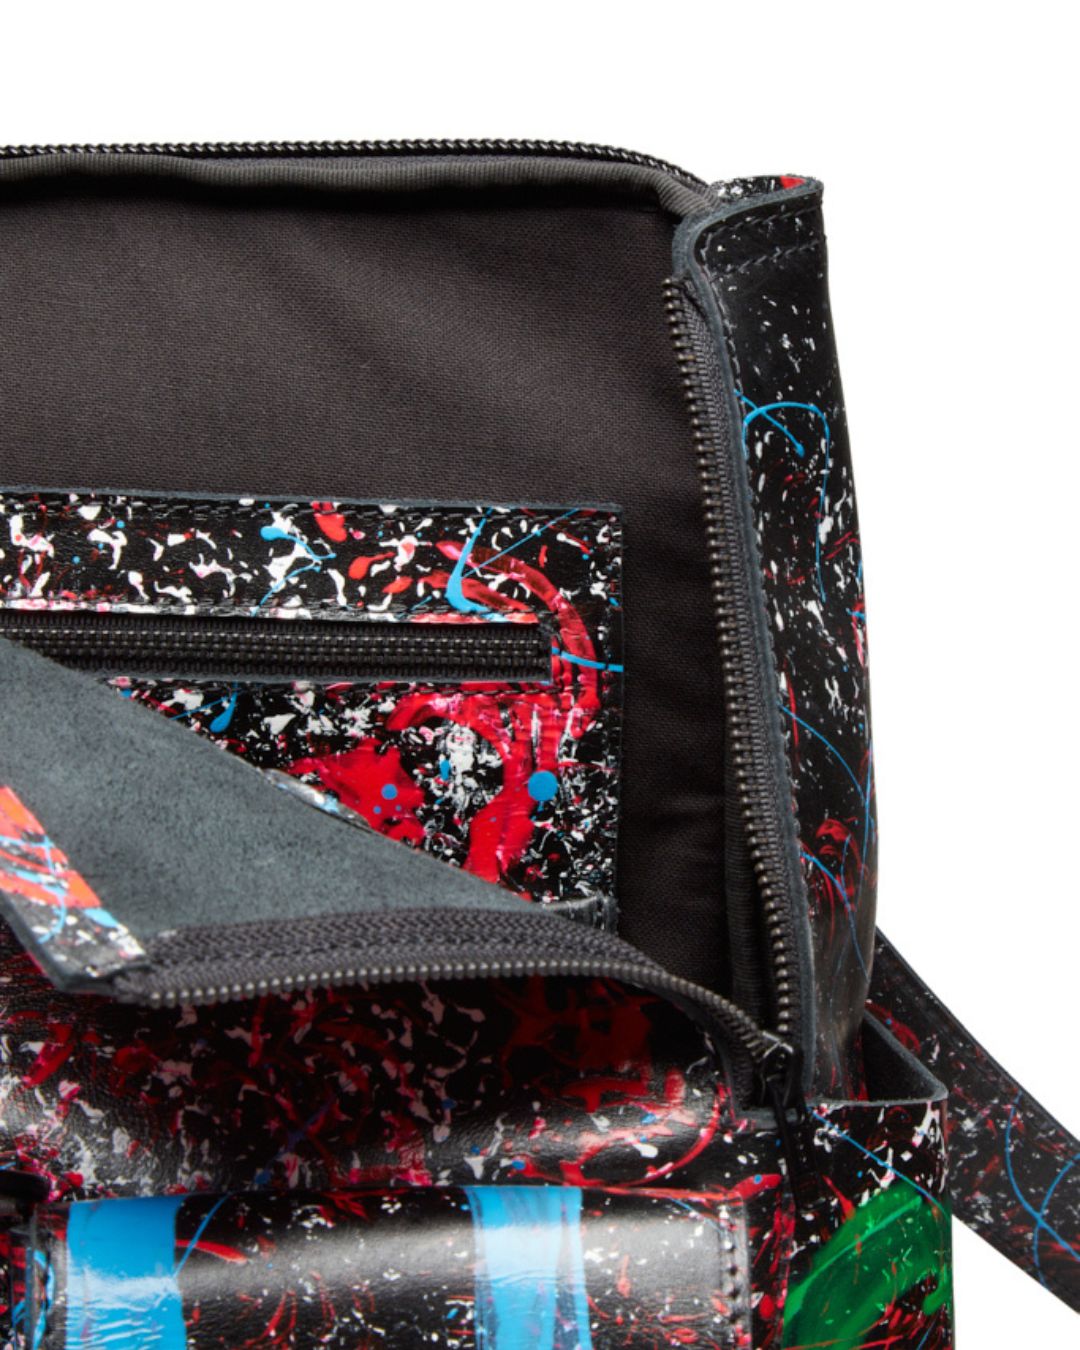 Confetti Leather Backpack